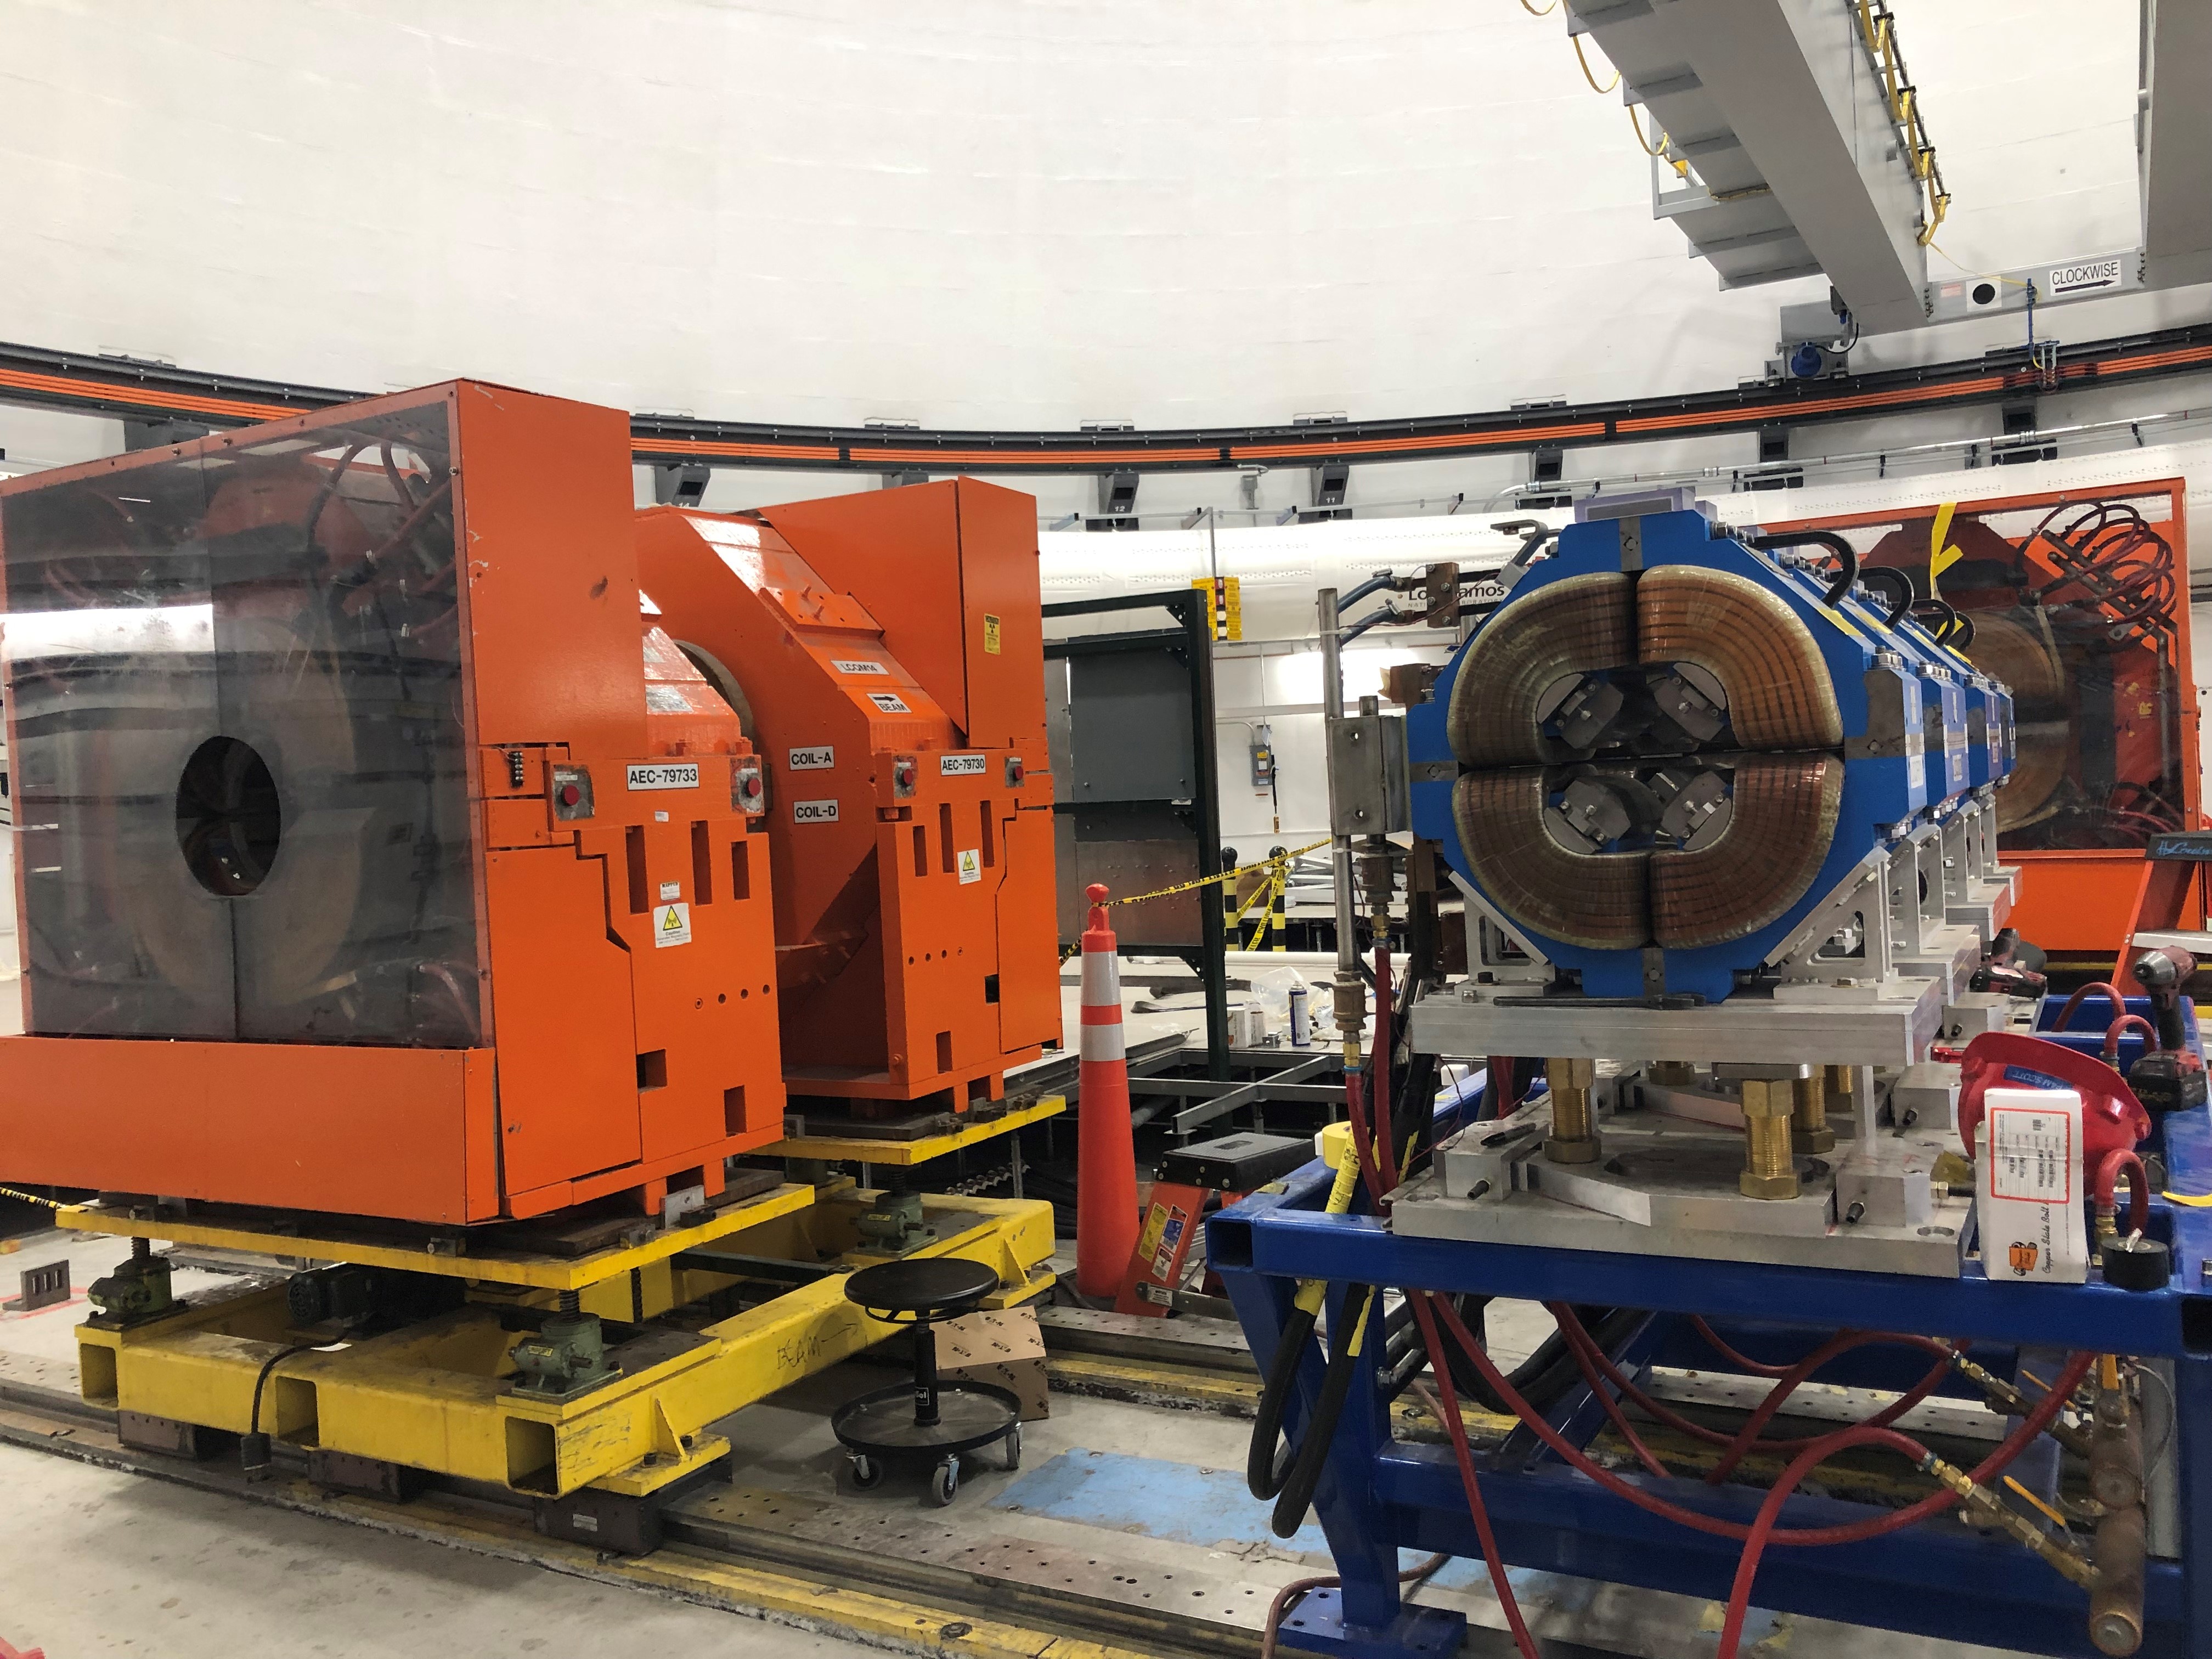 The Proton Radiography Facility’s two quadrupole magnets, the Identity Lens (left) and the x3 Magnifier (right), are now mounted on rails for simplified experimental setup.